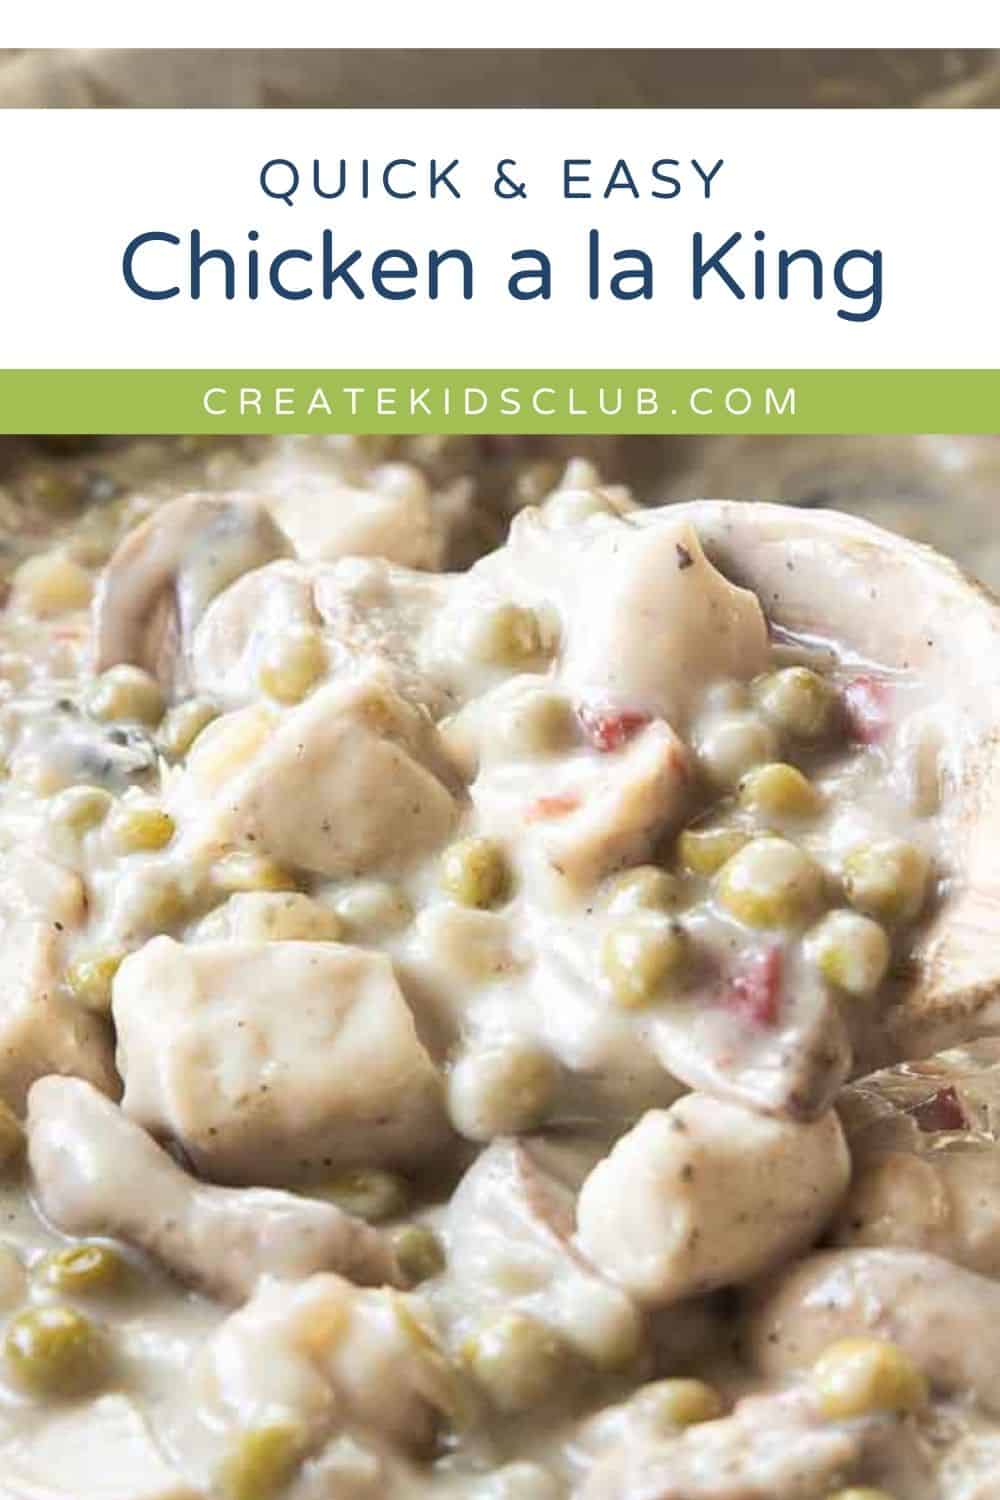 Pin showing chicken a la king.